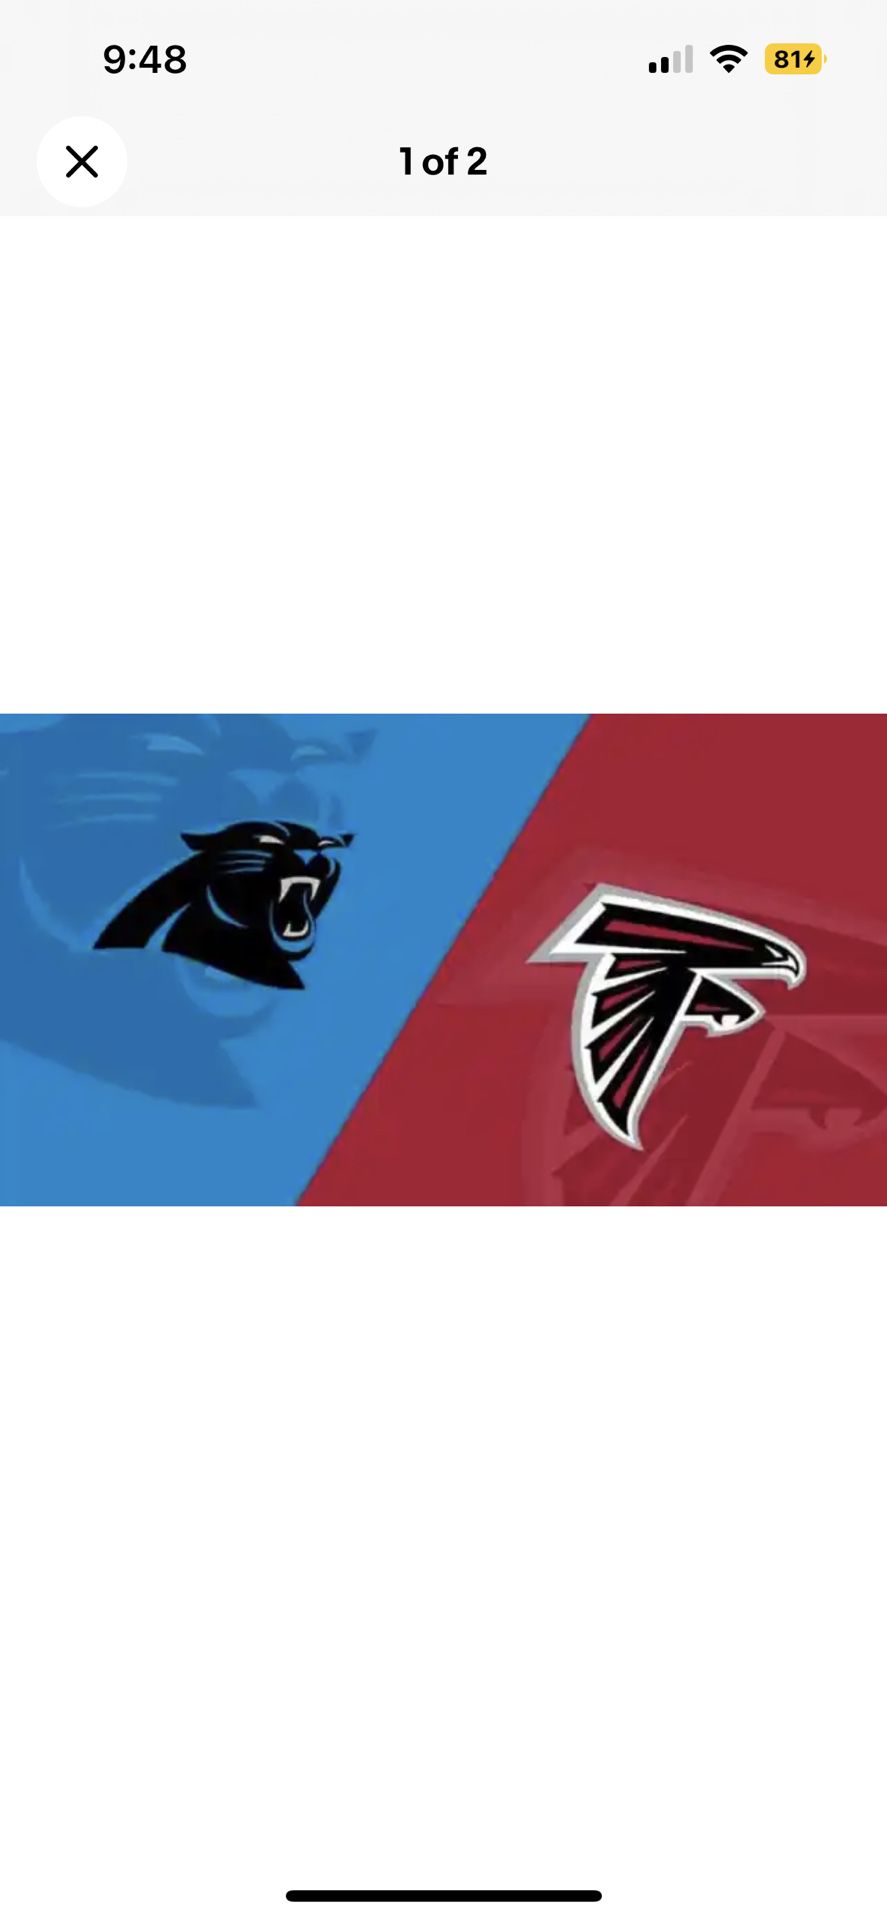 Panthers vd Falcons Tickets 